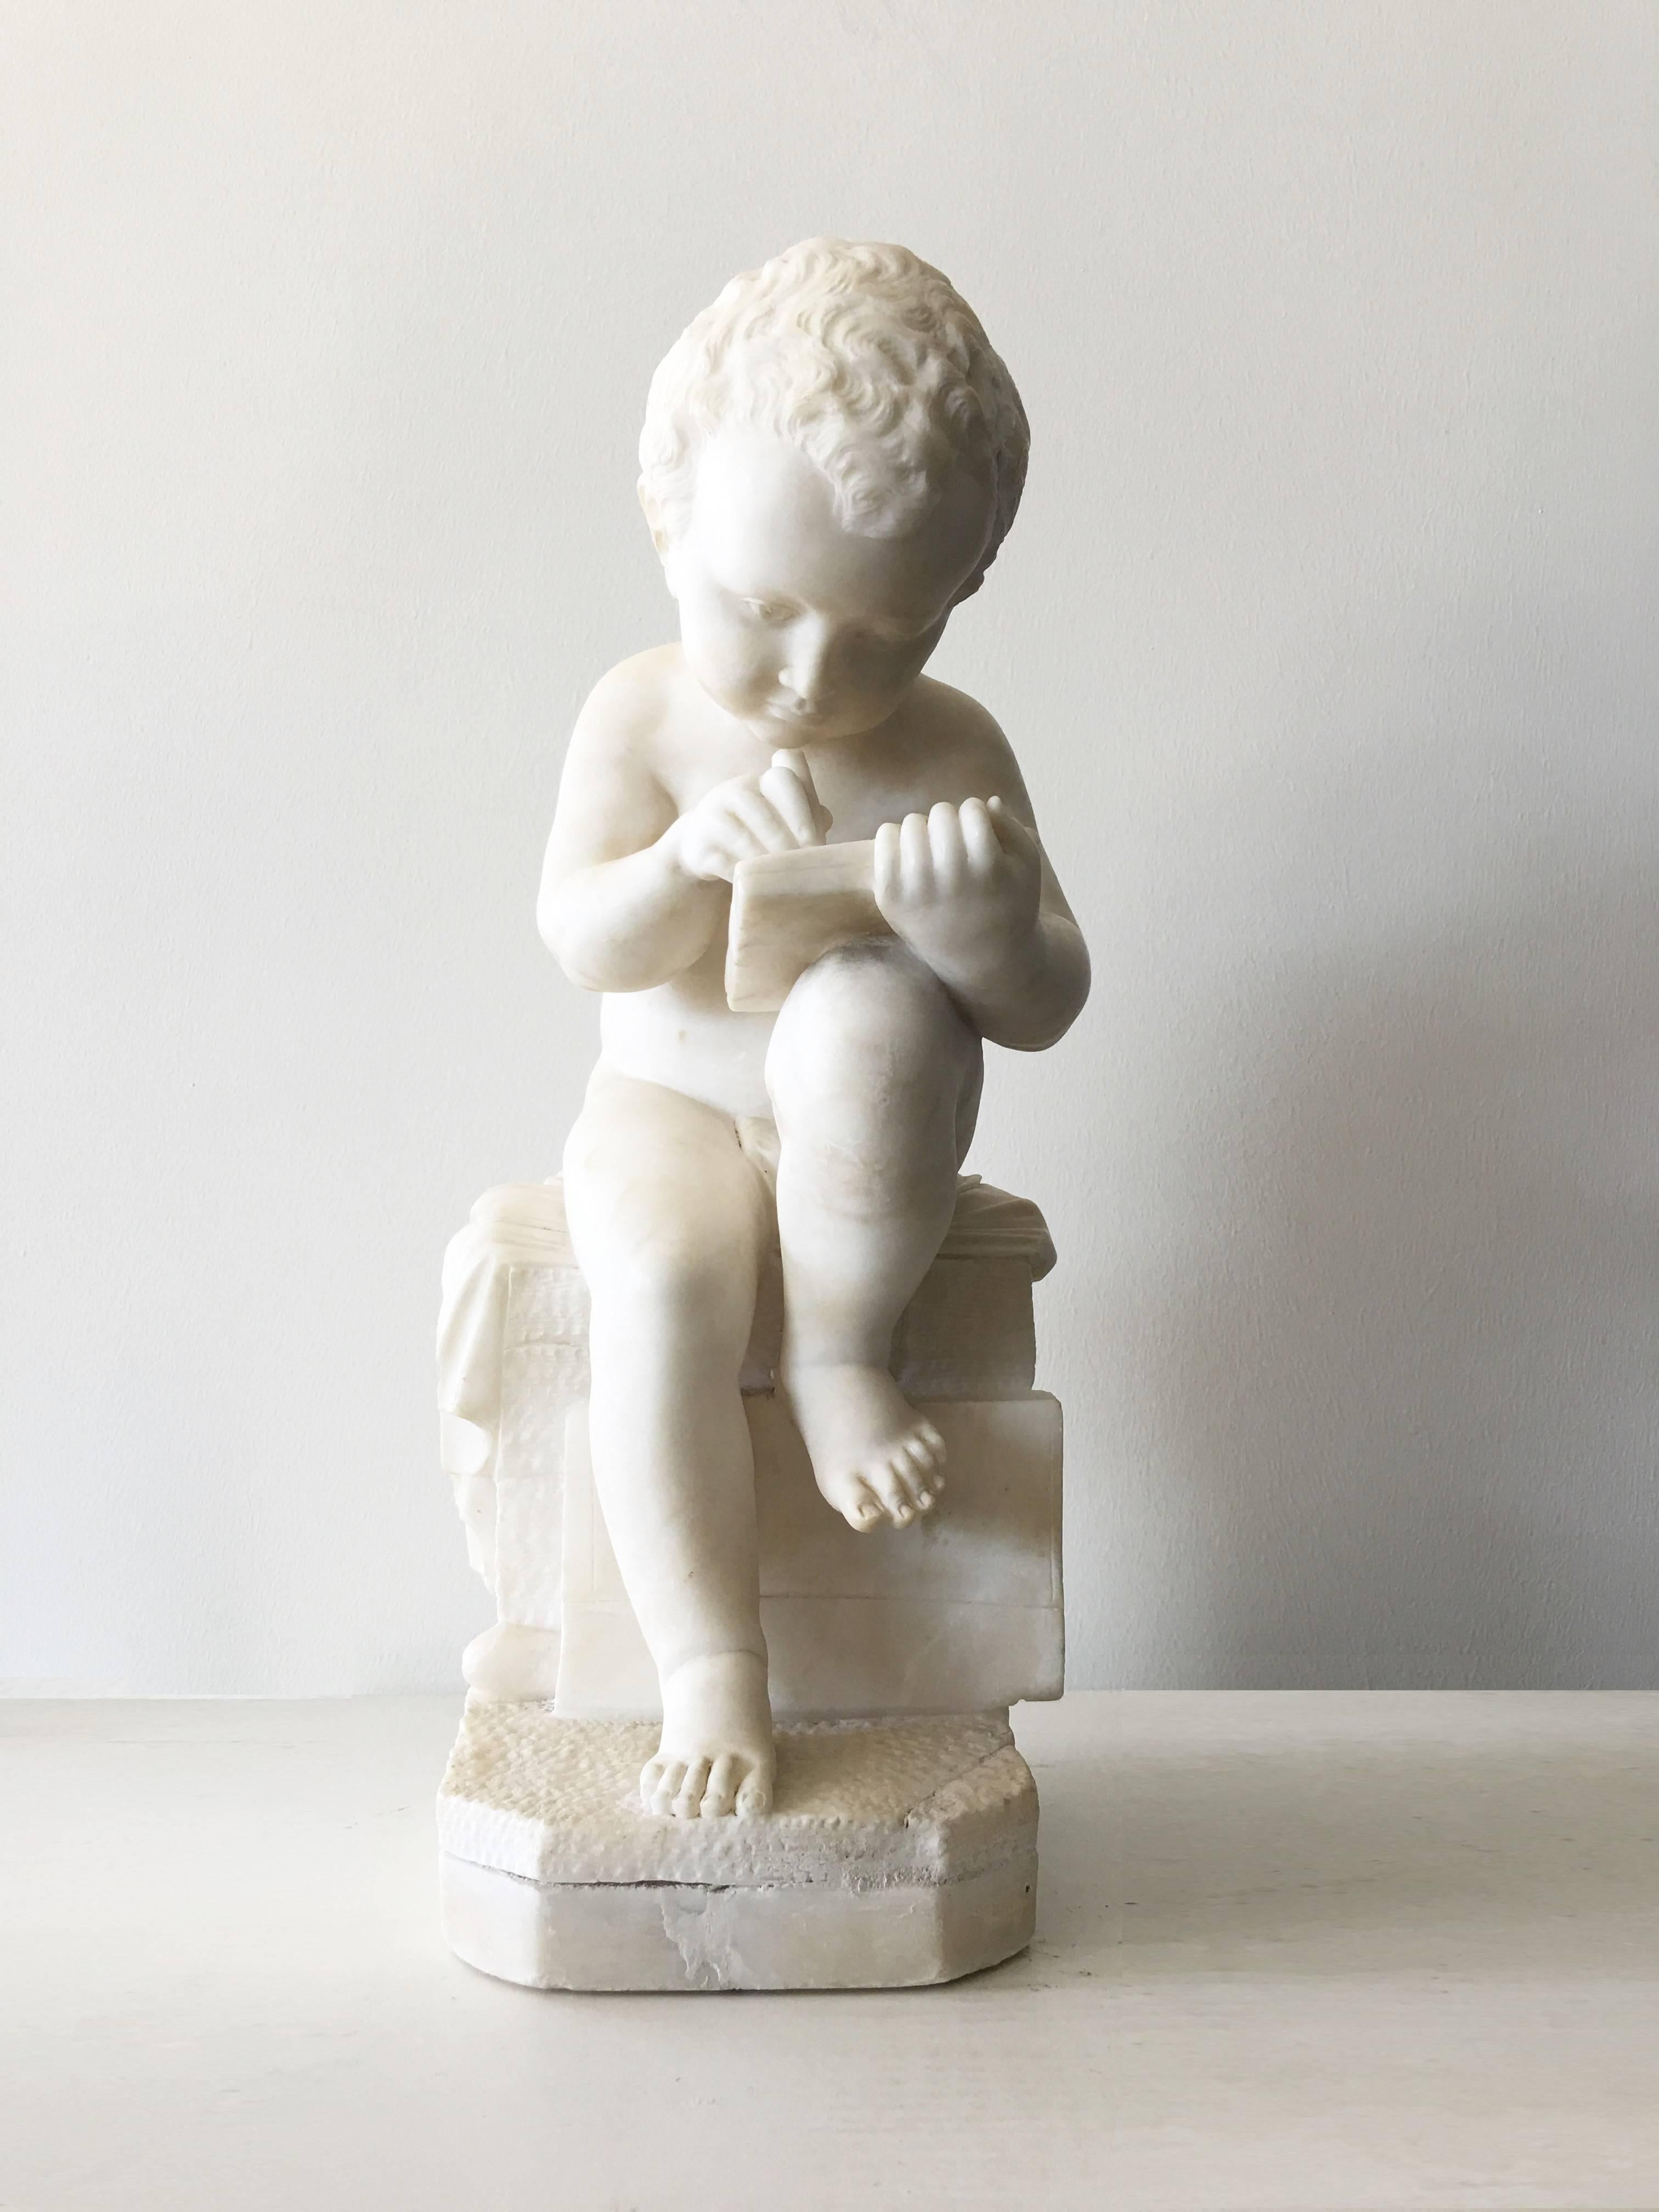 A finely carved marble sculpture. Featuring a figural sculpture featuring a young boy seating on a brick wall, a foot on a book. He is leaned over his drawing tablet. The precision of its details, especially of the hair, lend to its distinctive